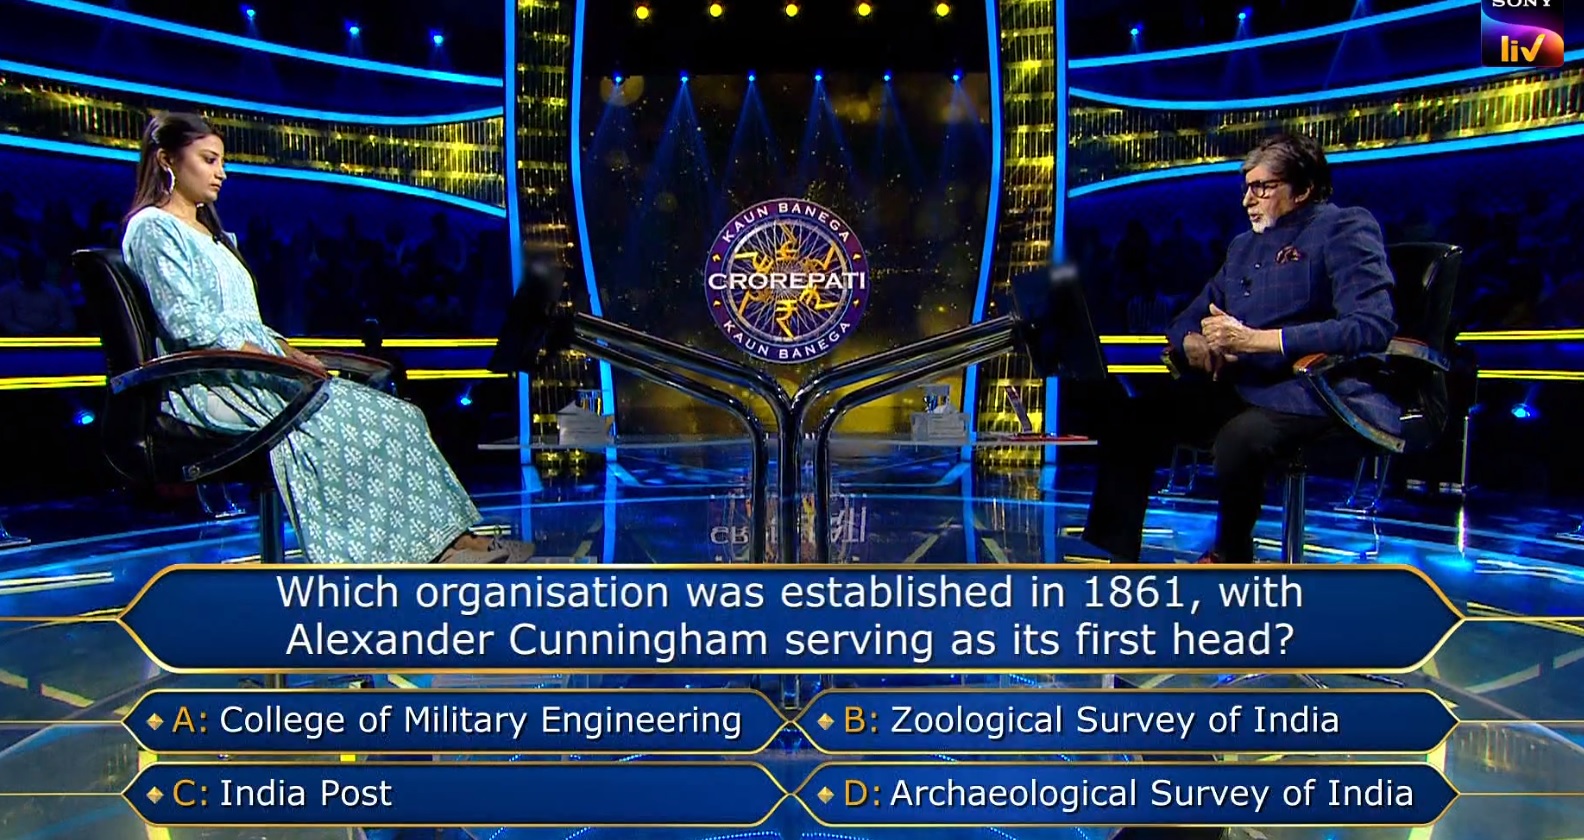 Ques : Which organisation was established in 1861, with Alexander Cunningham serving as its first head?